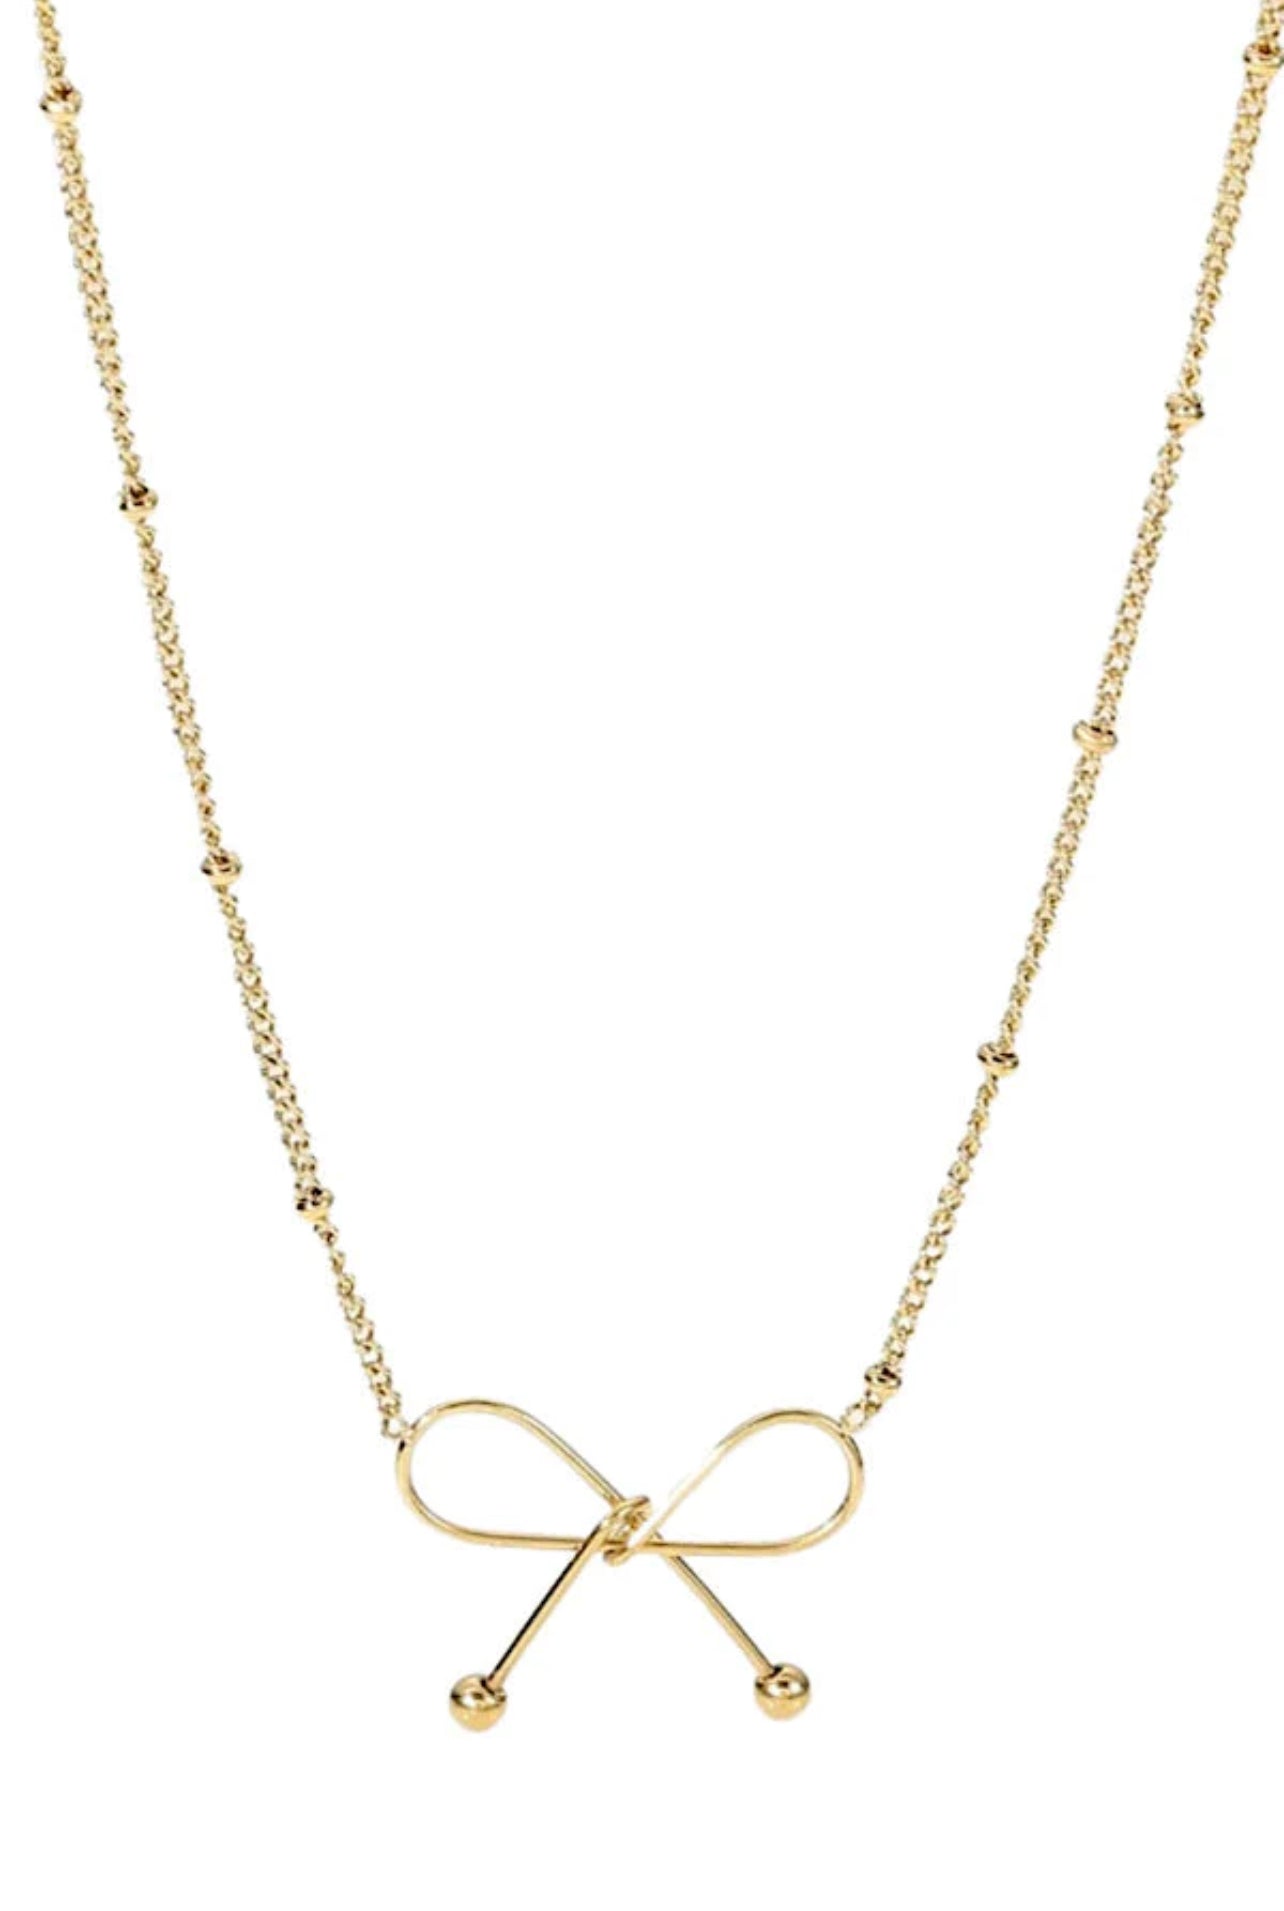 Dainty Bow Knot Necklace